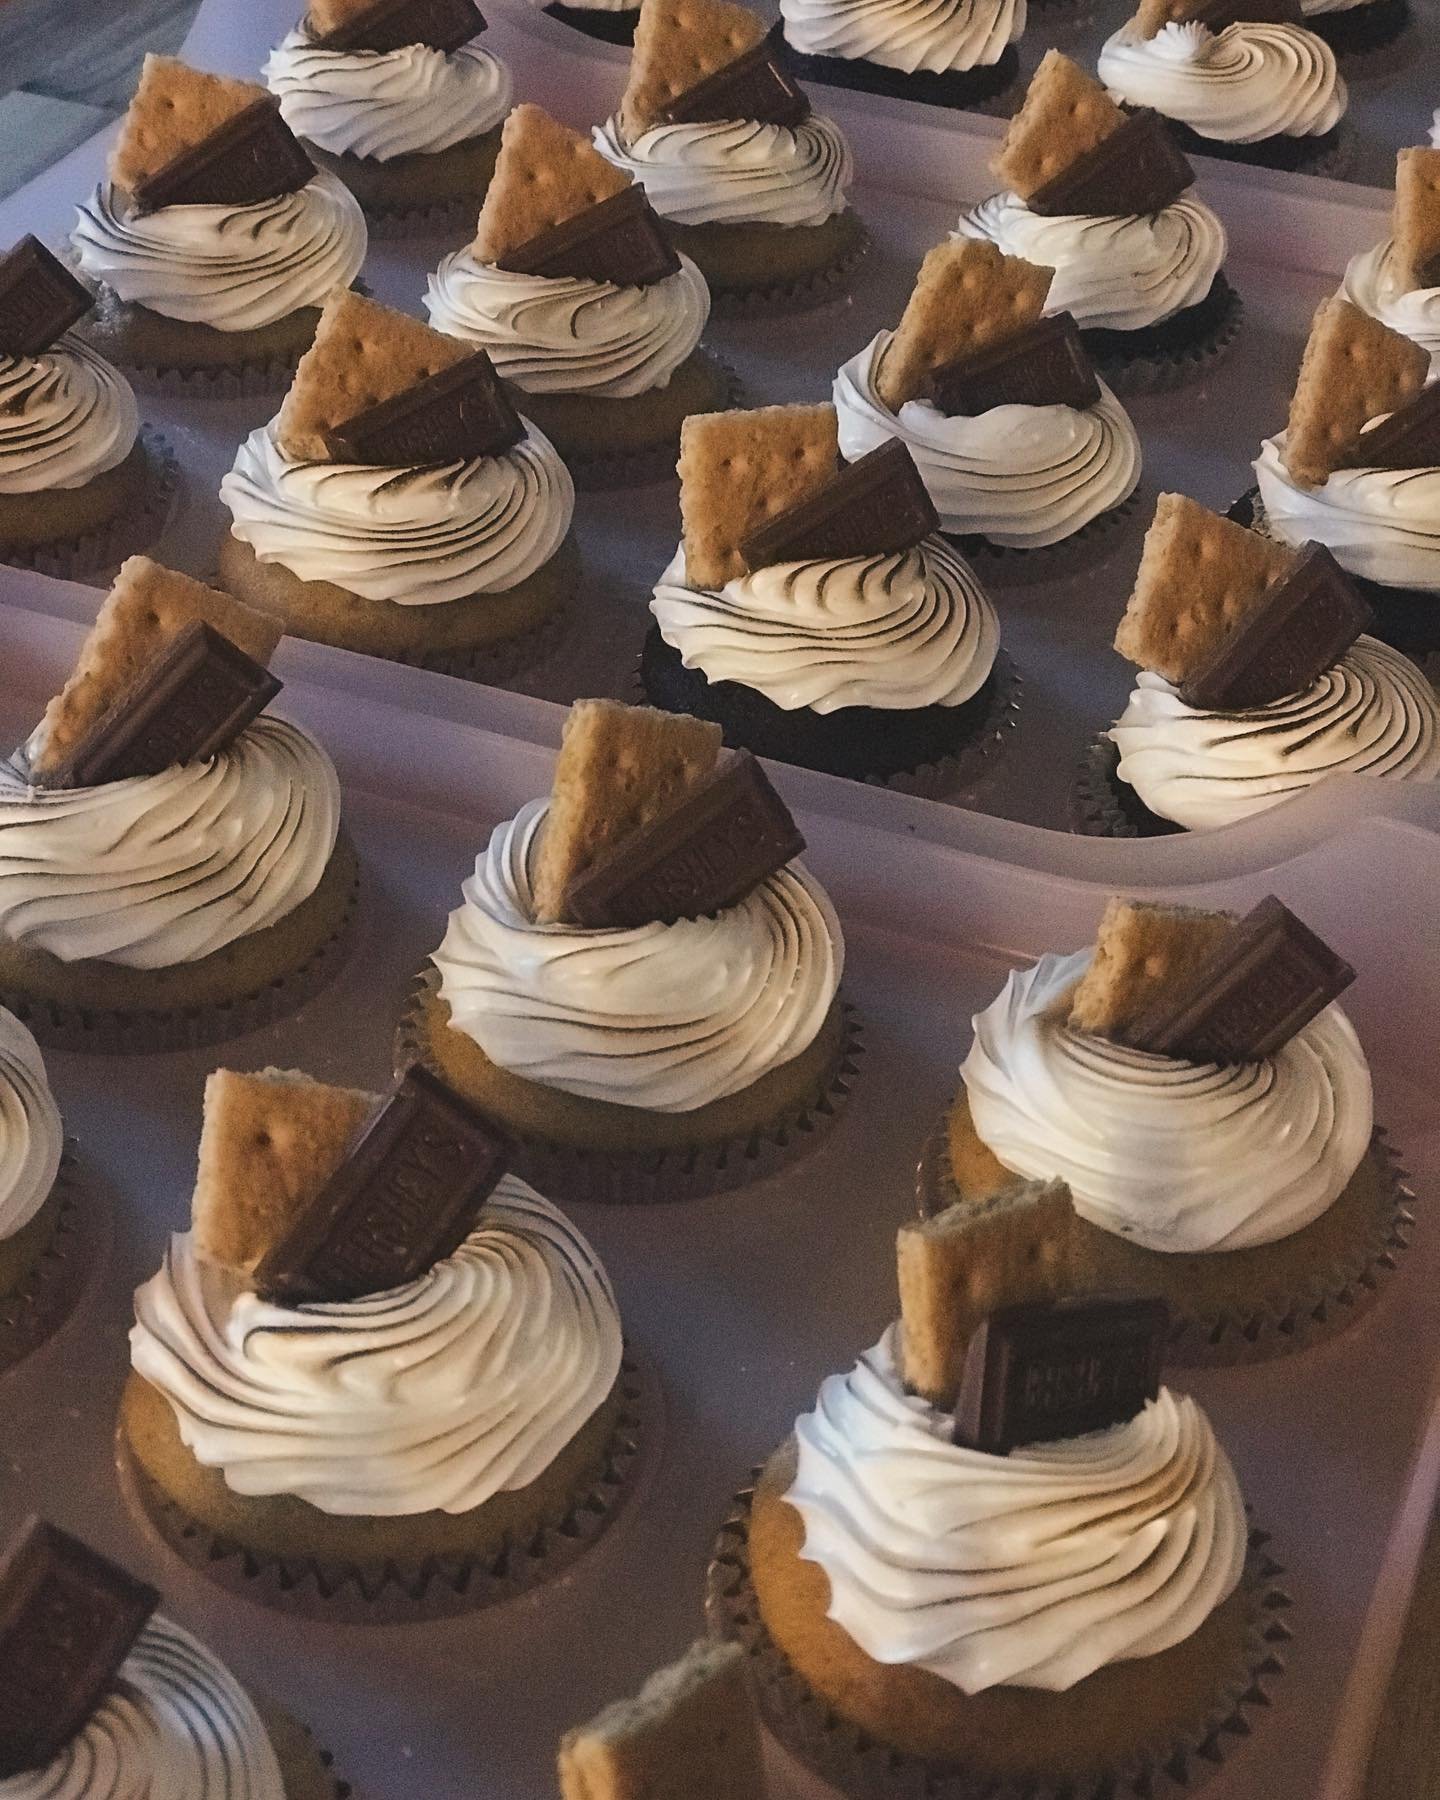 S&rsquo;mores cupcakes headed out.

Just wait until you see the rest of this adorable order. 🏕